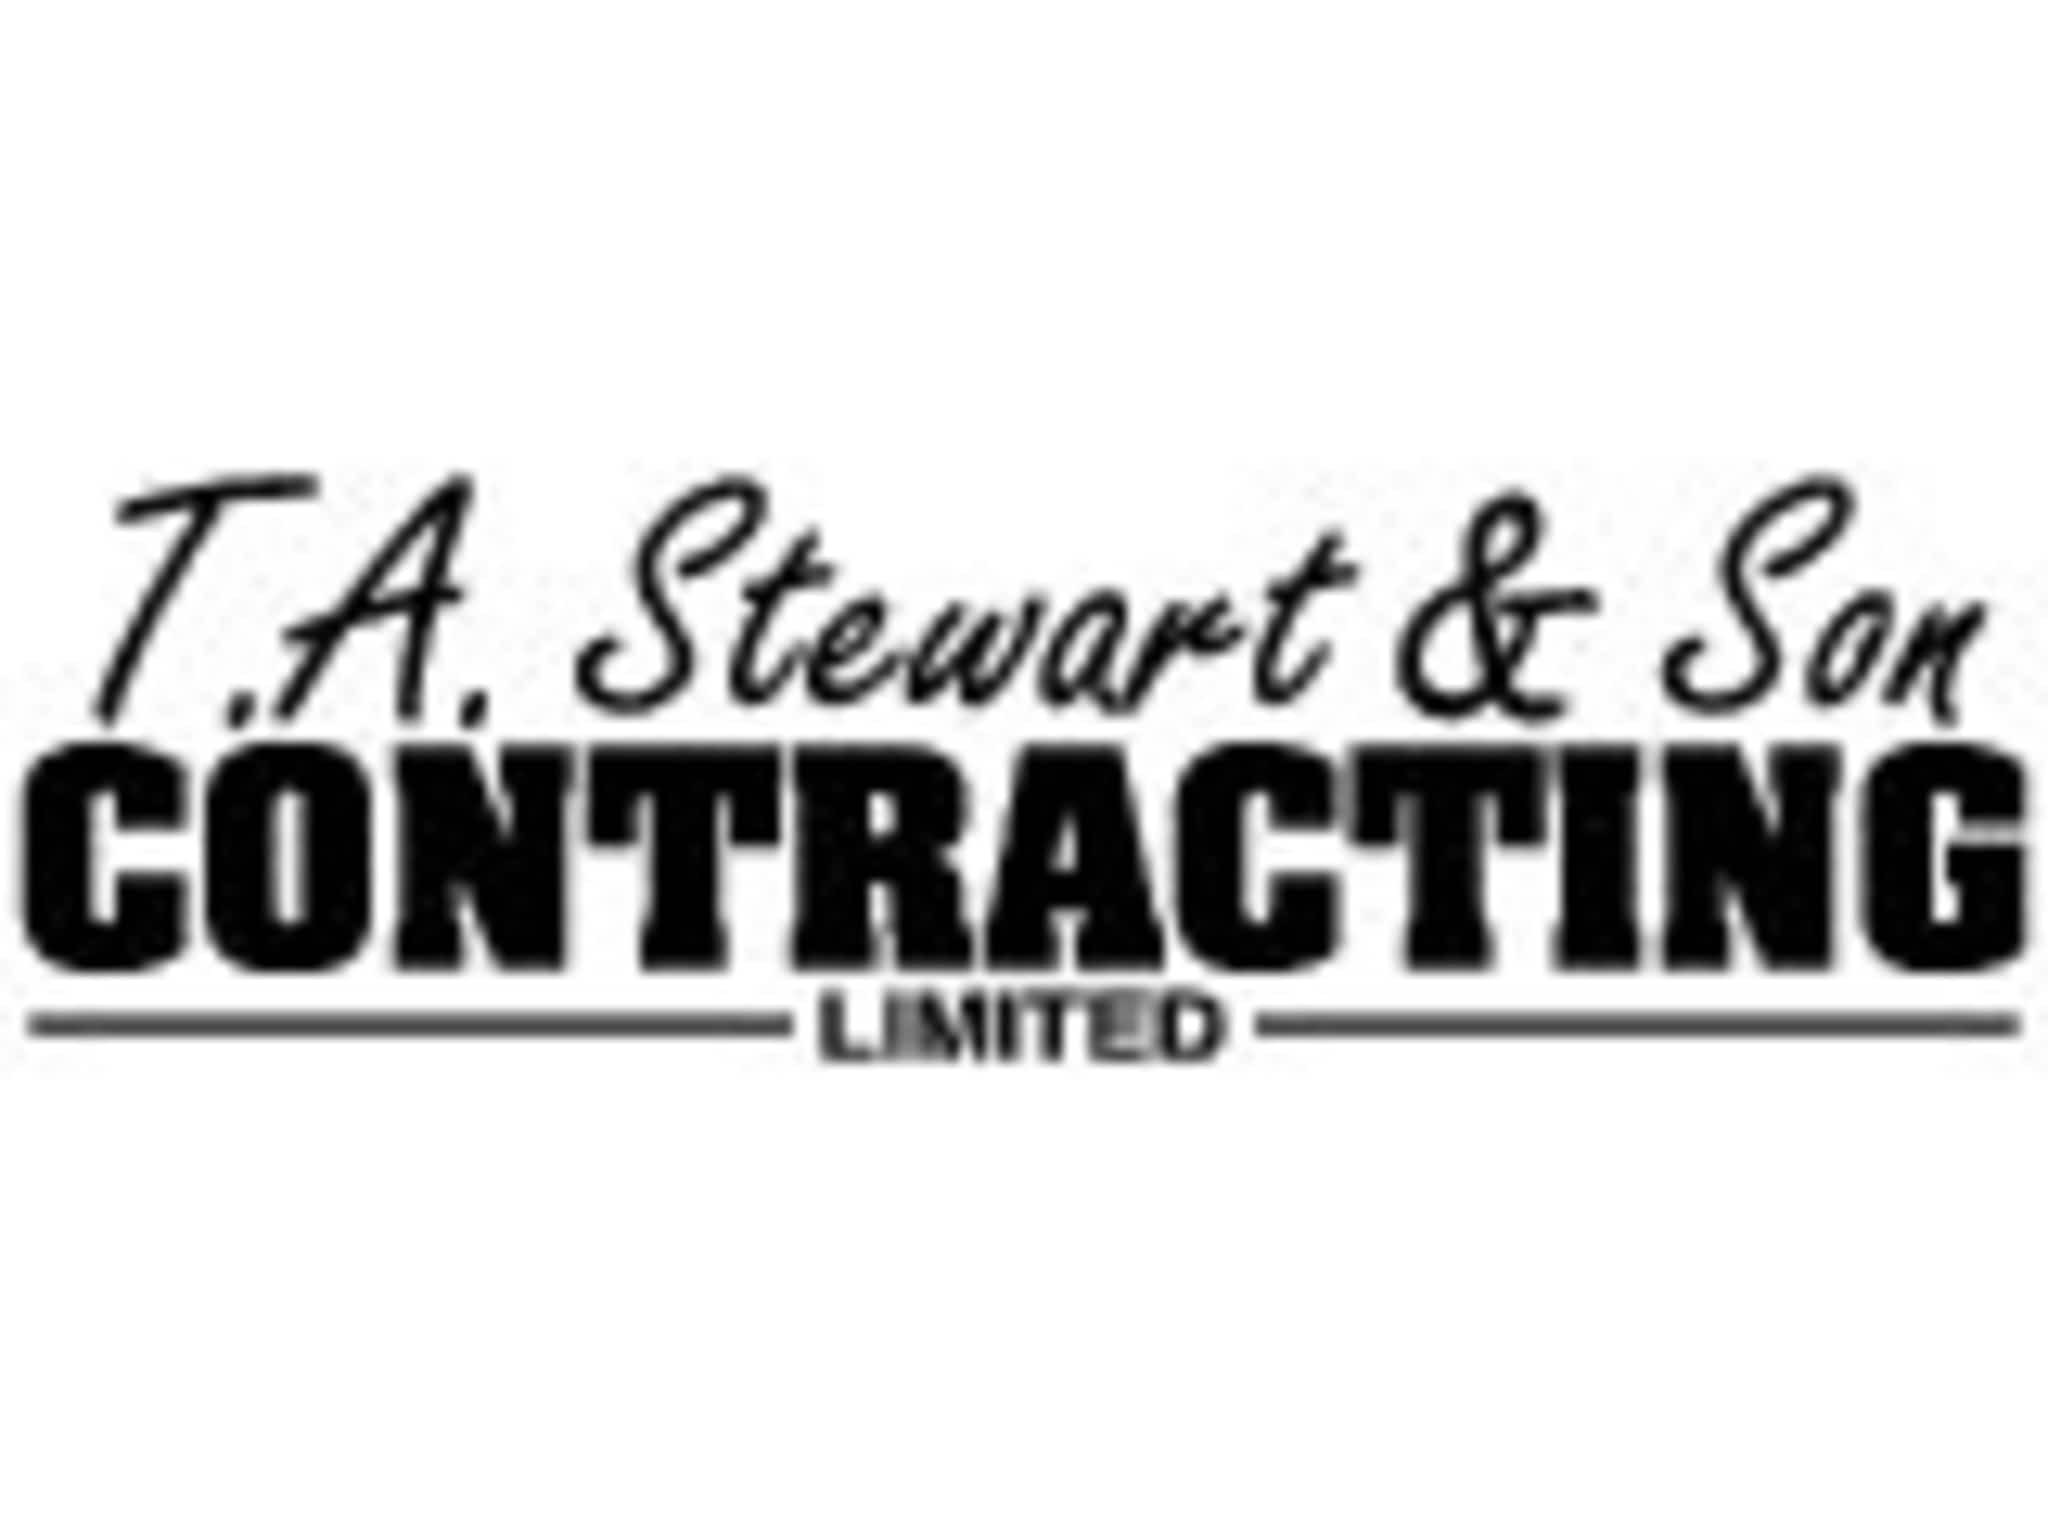 photo Stewart TA And Son Contracting Limited